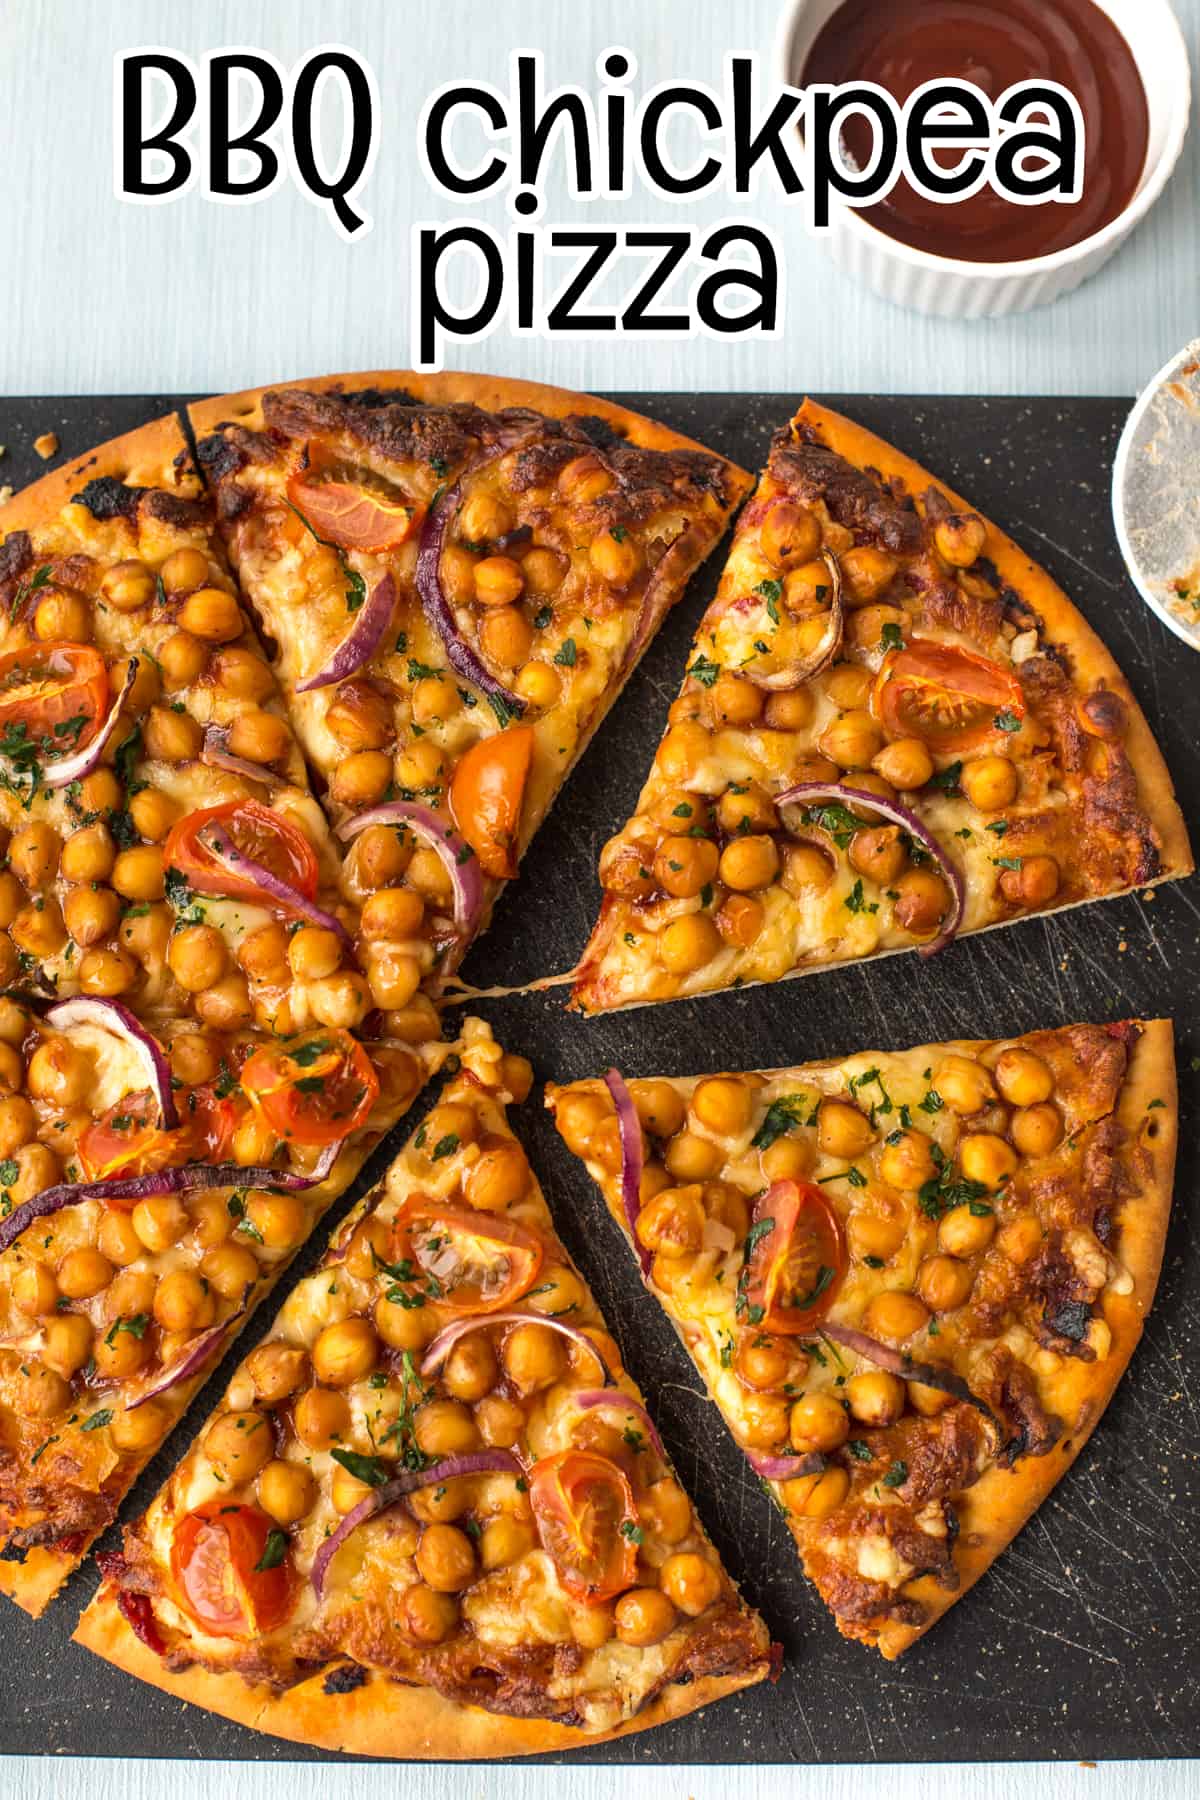 A BBQ chickpea pizza cut into slices, shot from above.